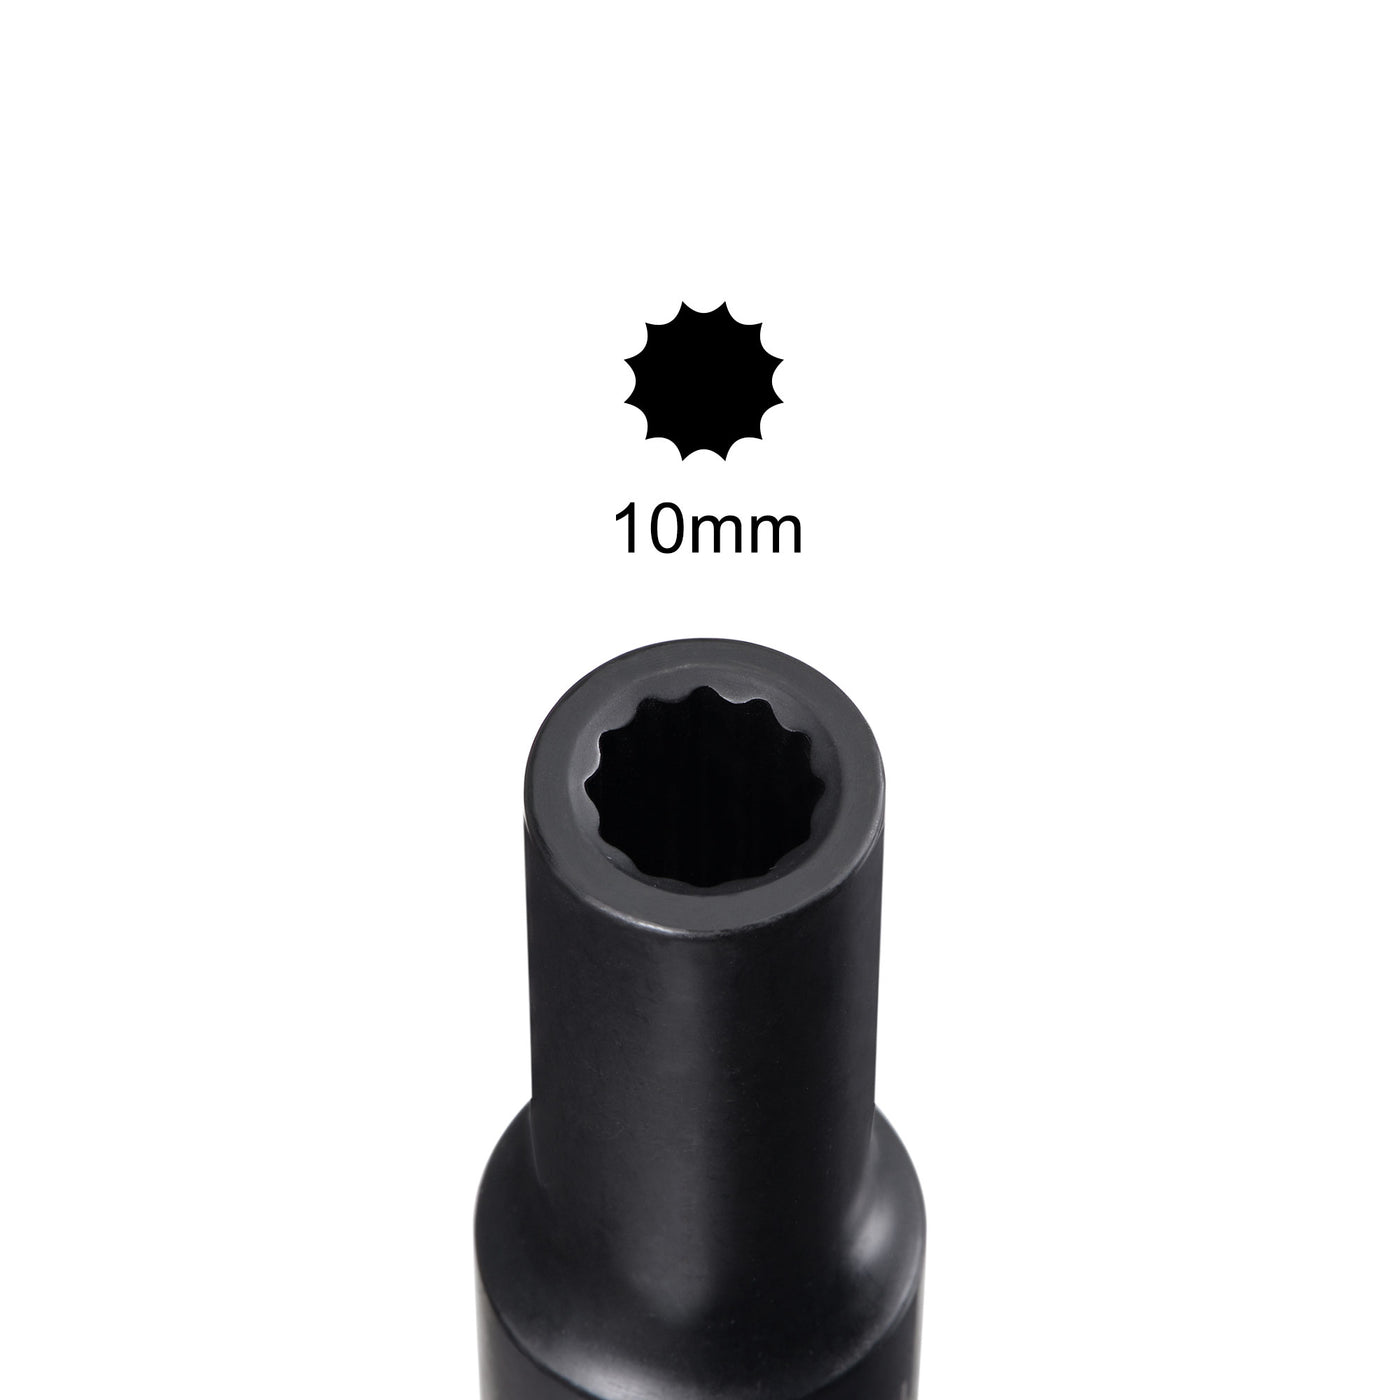 uxcell Uxcell 1/2-Inch Drive 10mm 12-Point Deep Impact Socket, CR-MO Steel 78mm Length, Metric